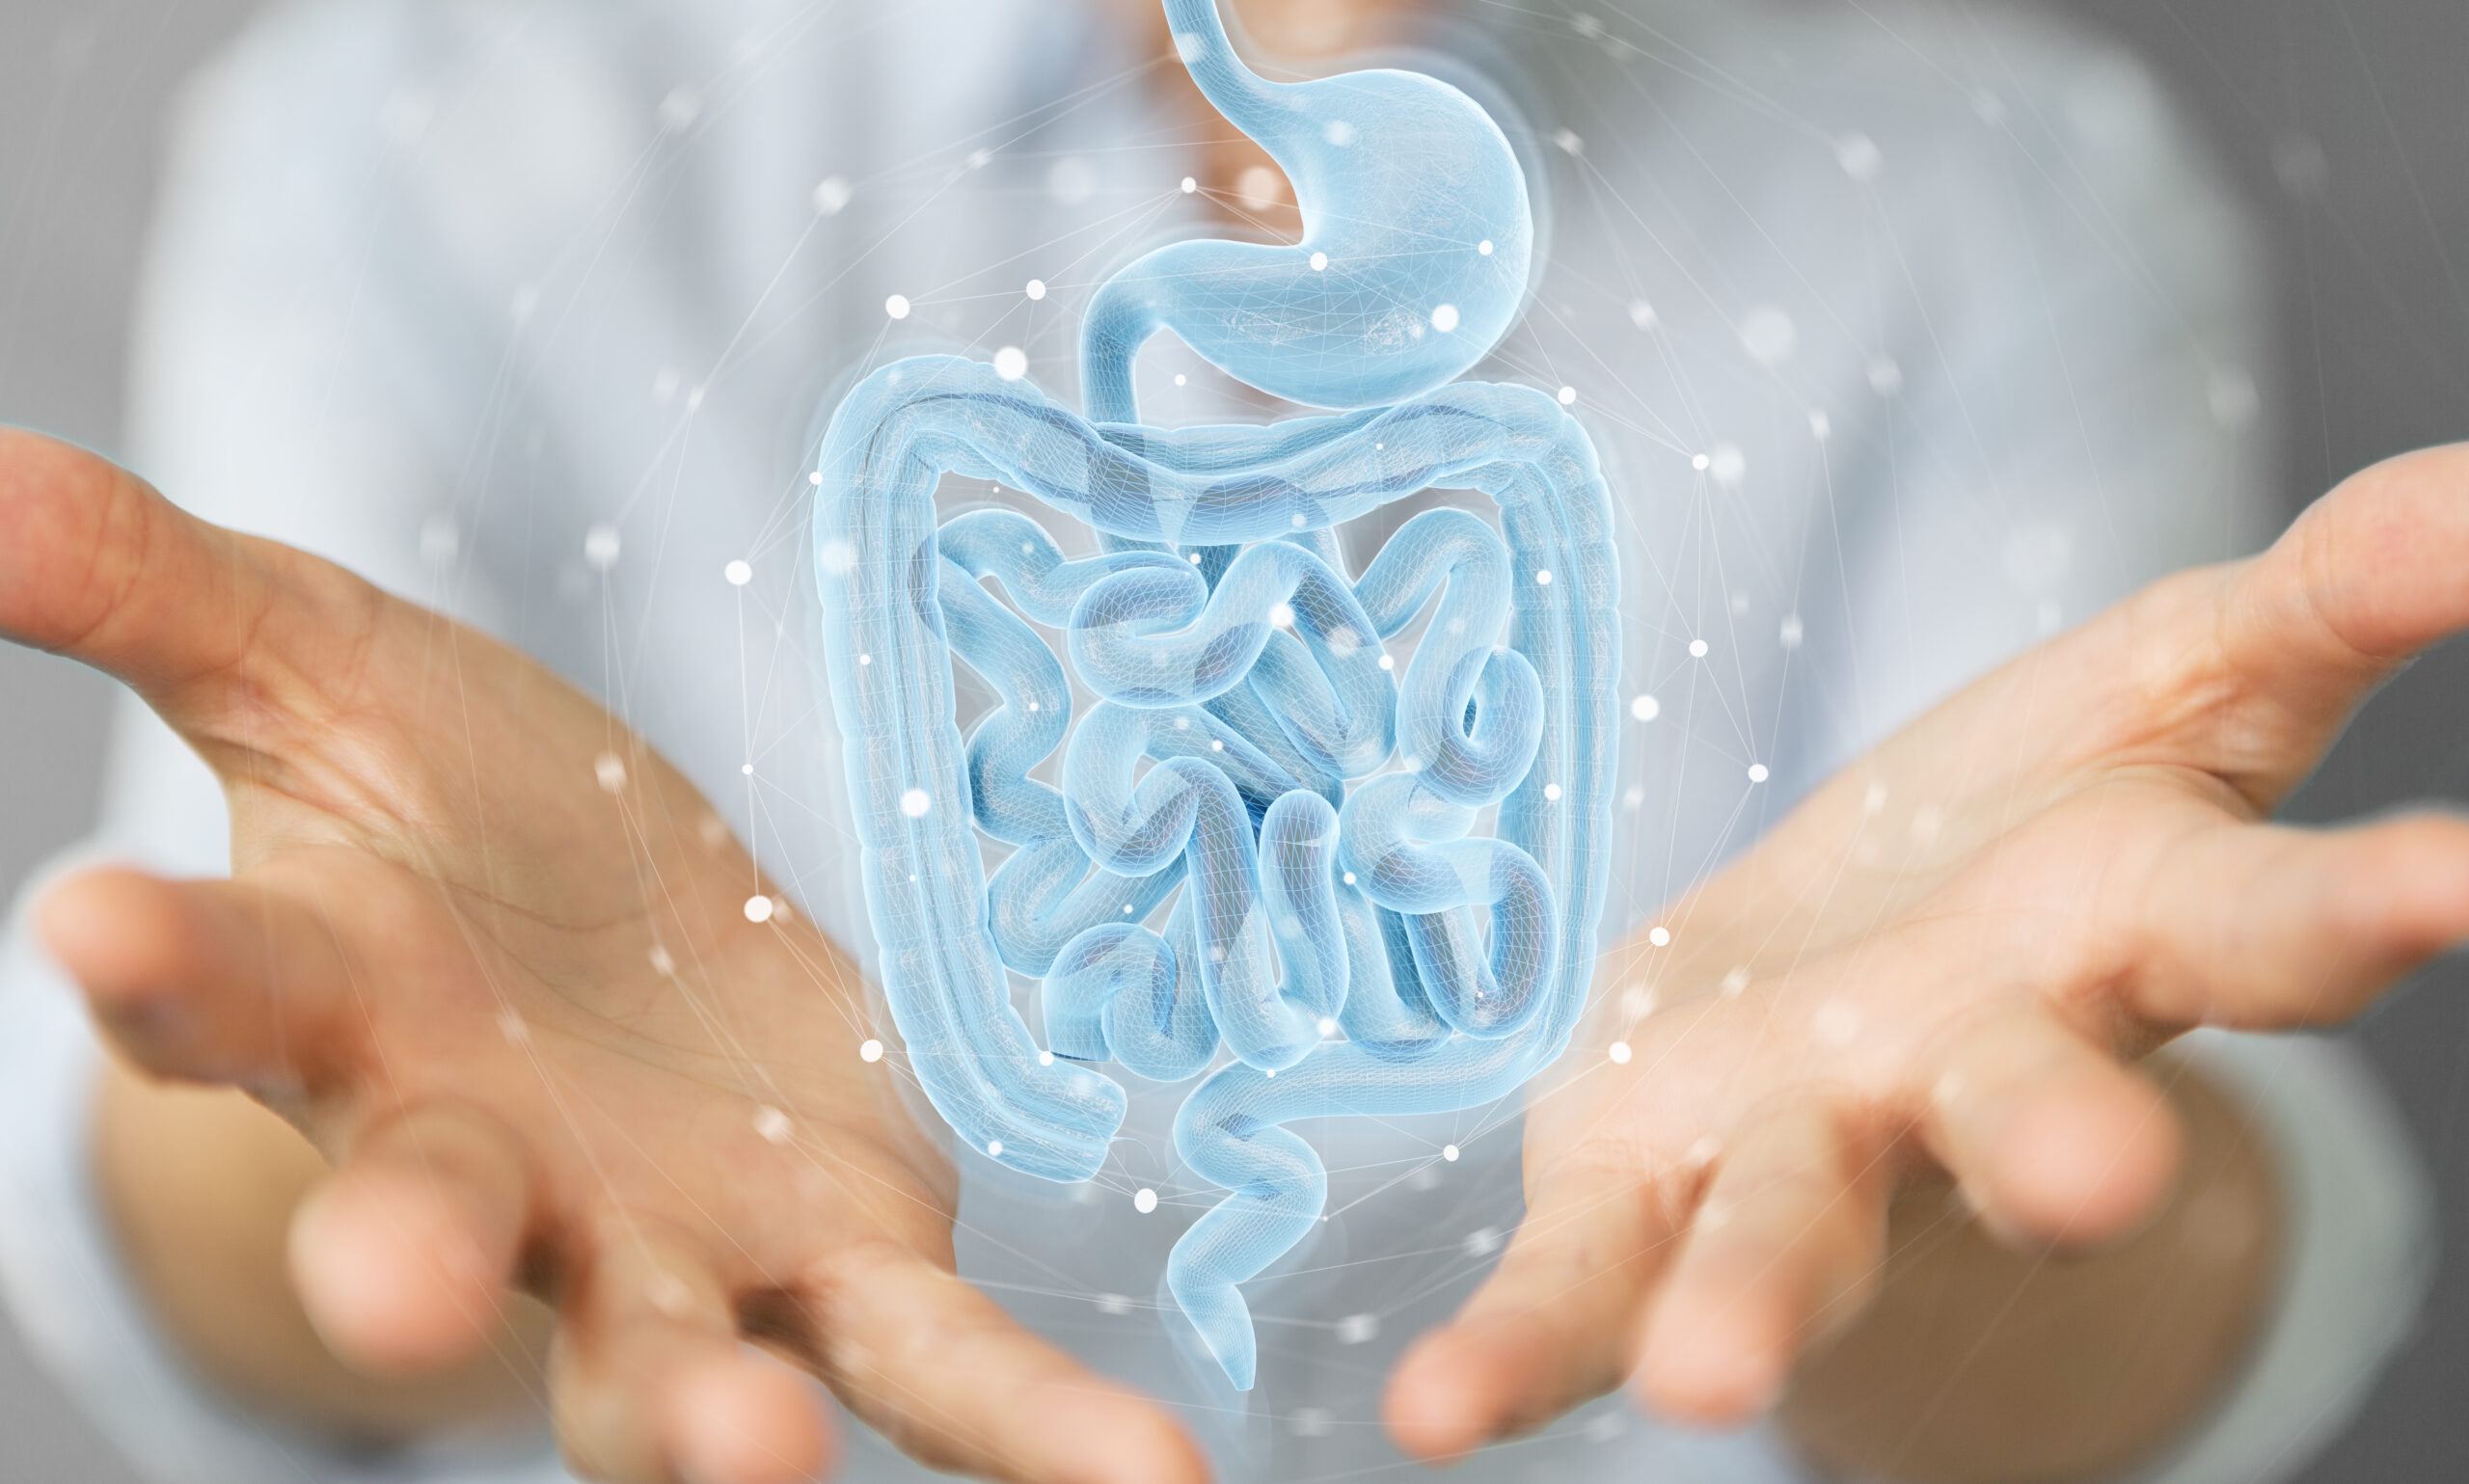 Photograph of a medical professional opening their hand and a computer generated technical image of a gastrointestinal tract diagram is being revealed.